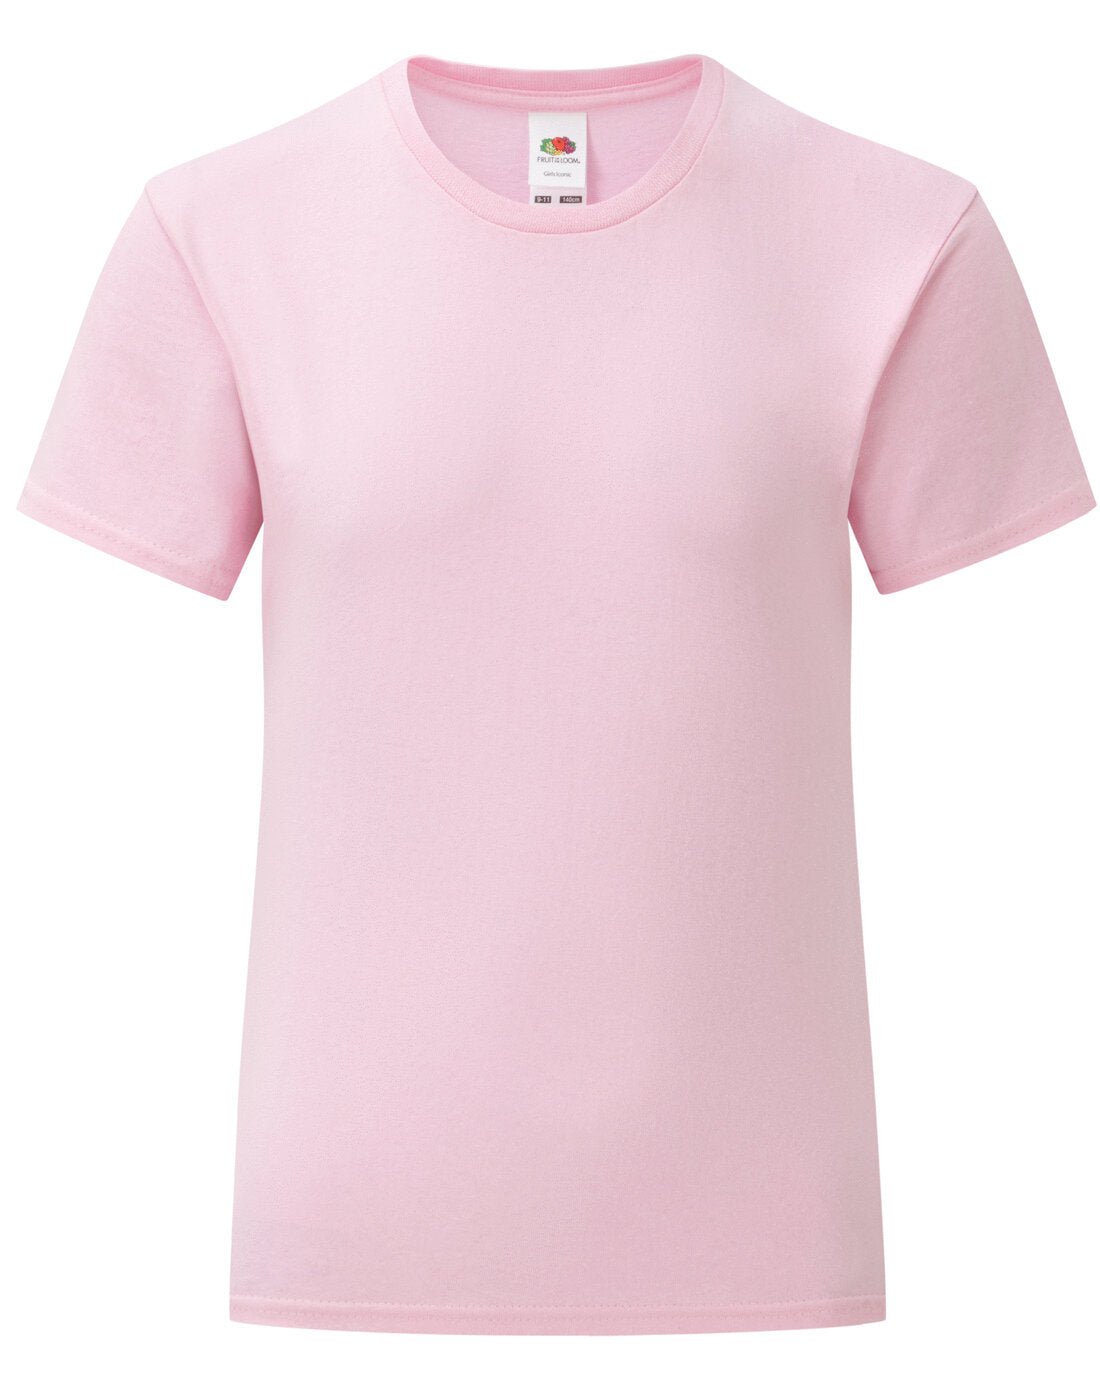 Fruit of the Loom Girls Iconic T - Light Pink